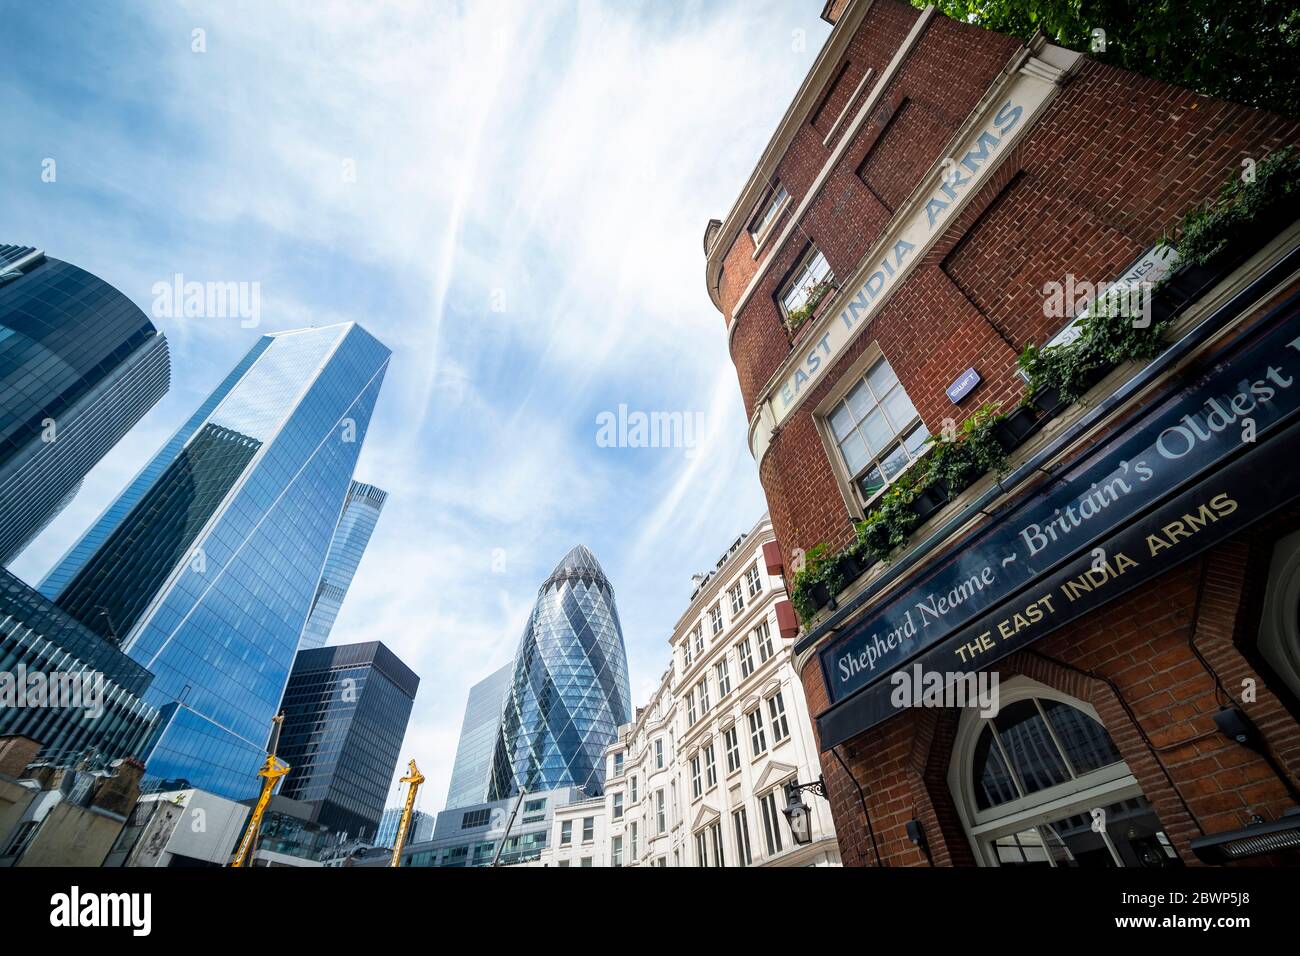 City Of London financial district - UK Stock Photo